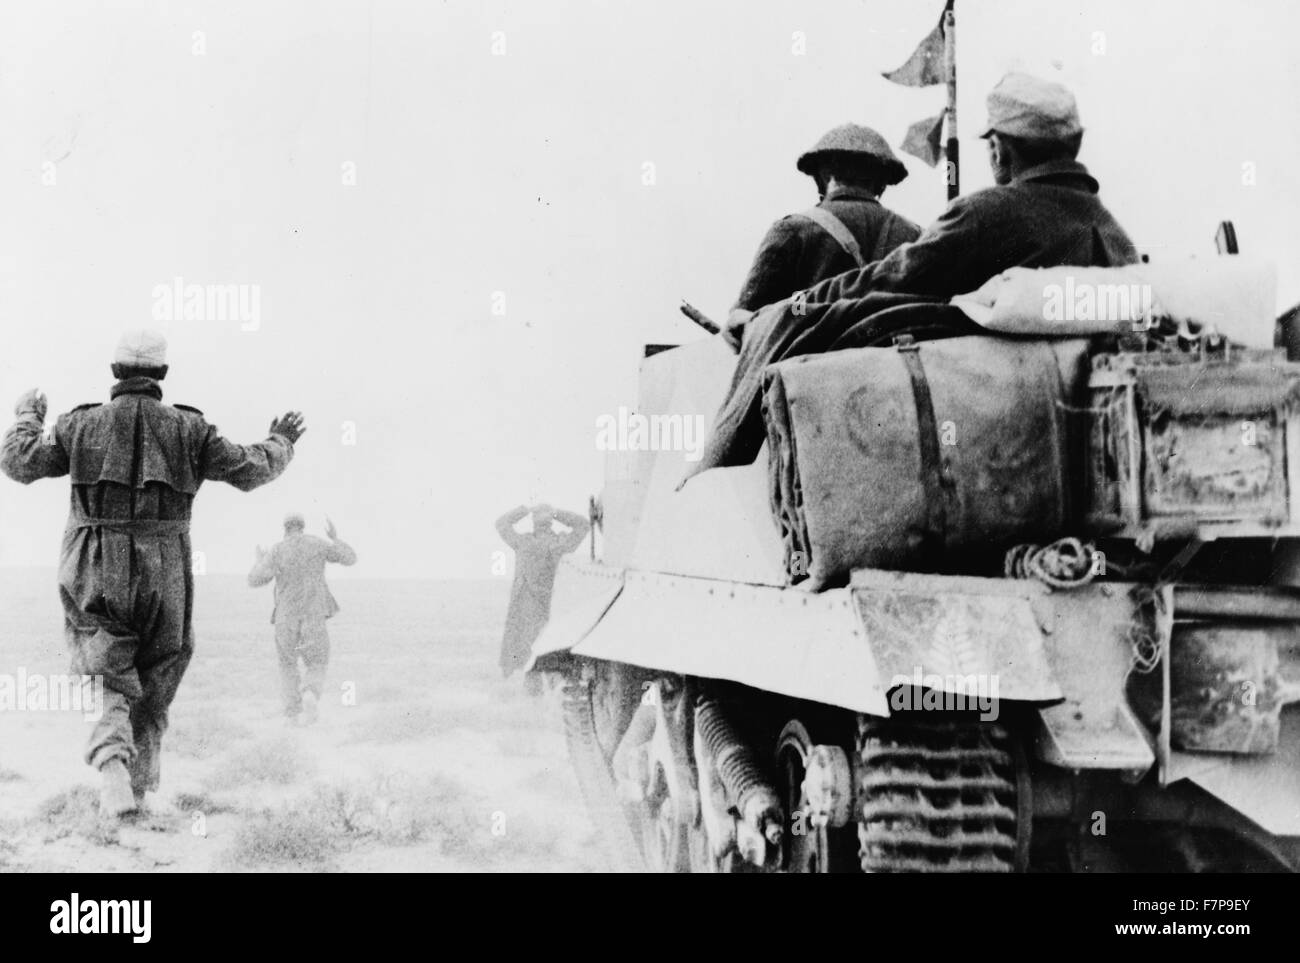 Photographic print of a Second World War German infantry surrendering to men of New Zealand Bren carrier unit. A wounded prisoner can be seen riding in the back of the carrier. Dated 1942 Stock Photo